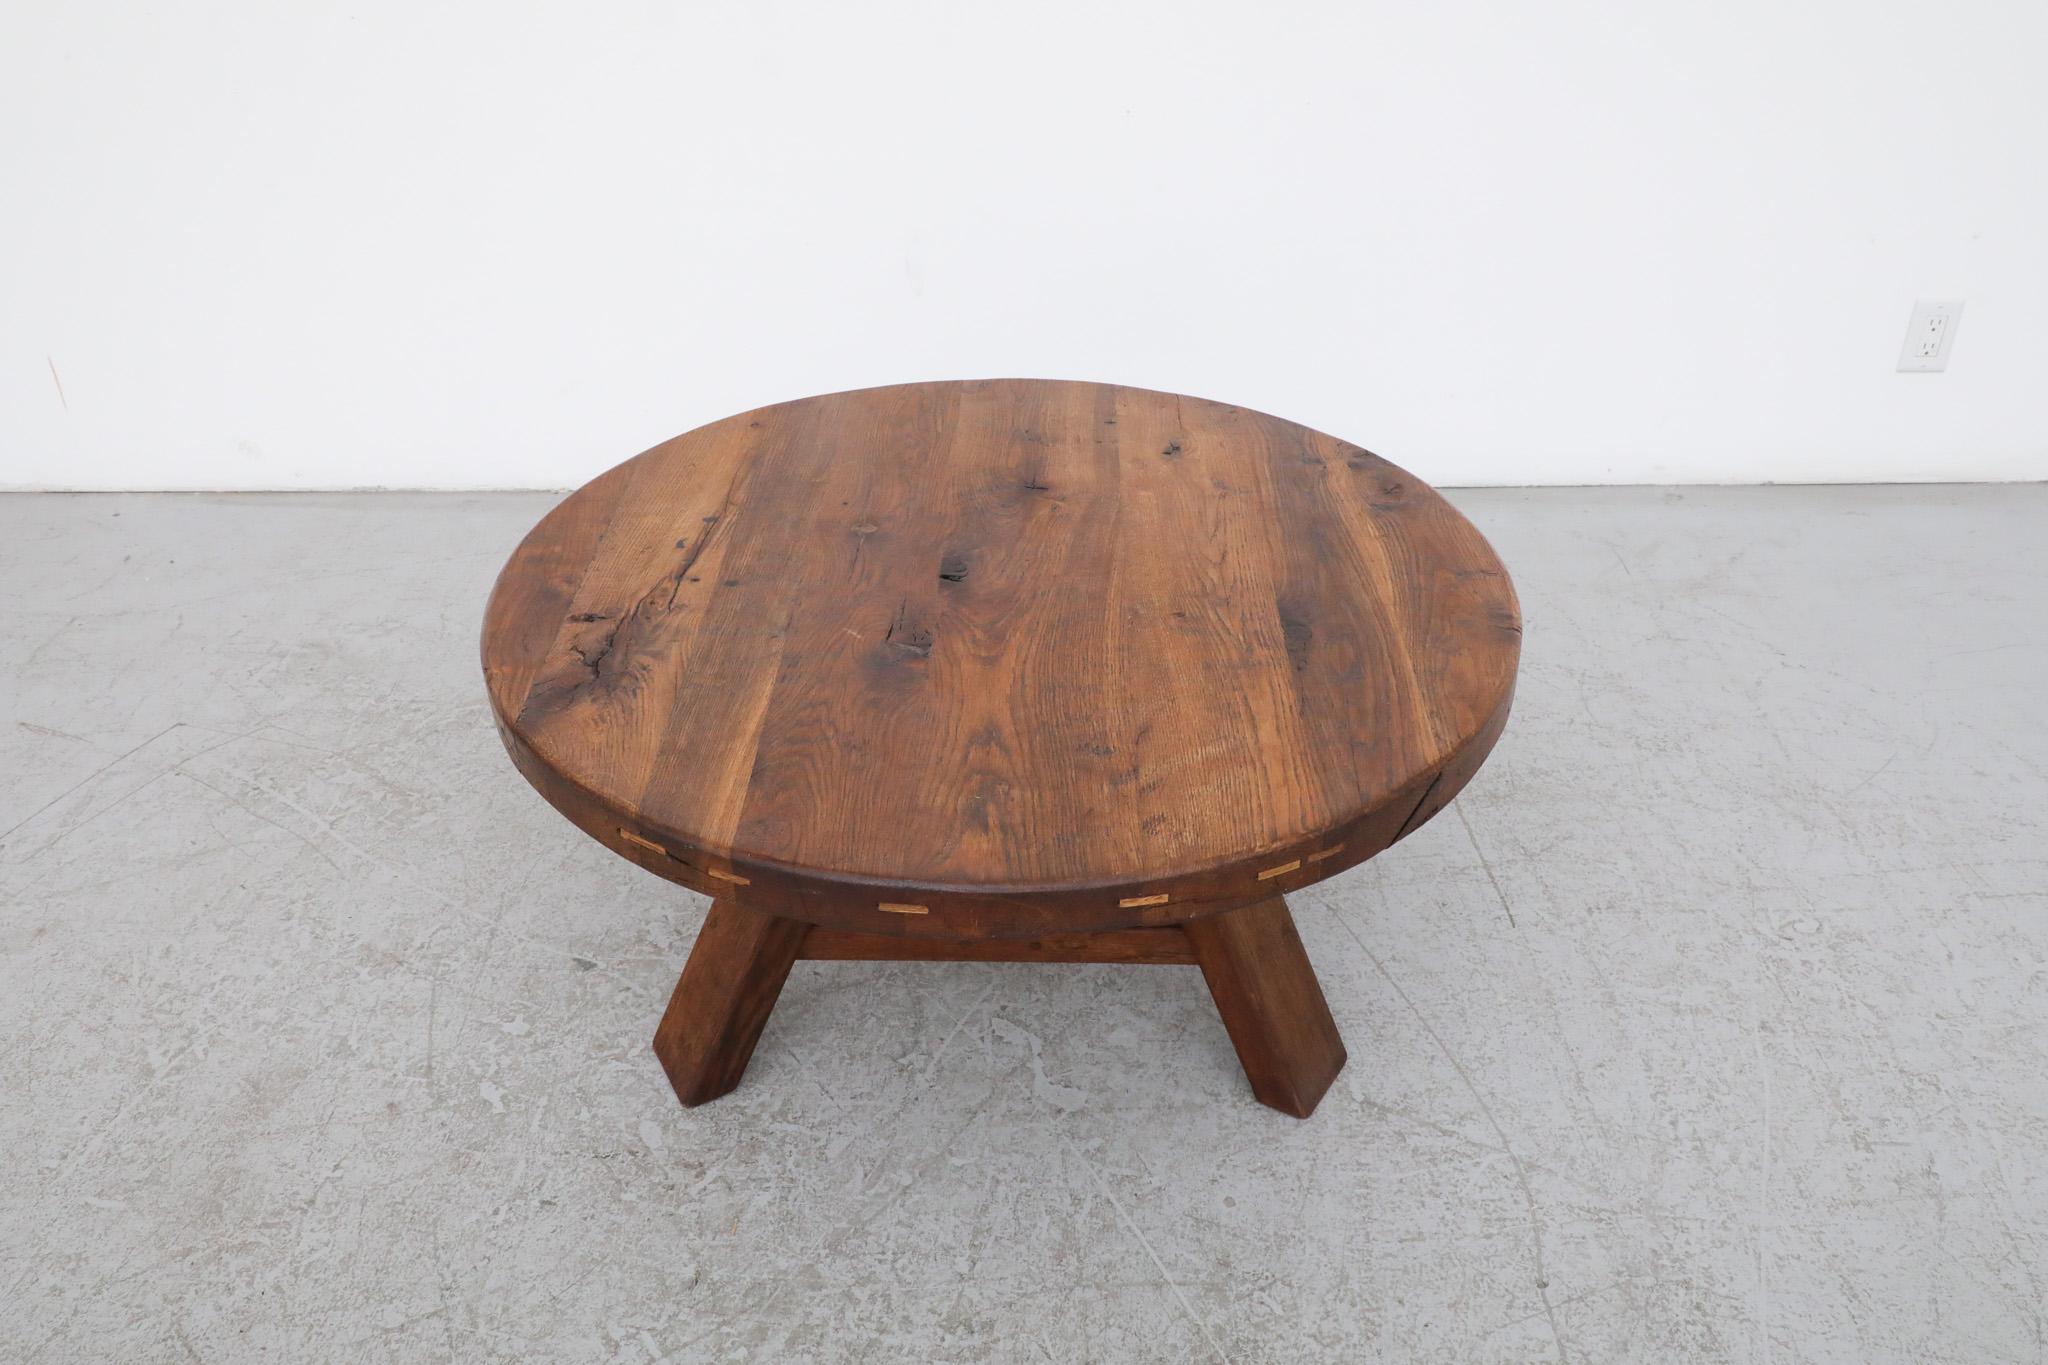 Stunning Pierre Chapo inspired Brutalist Round Oak Coffee Table with Trestle Bas 1